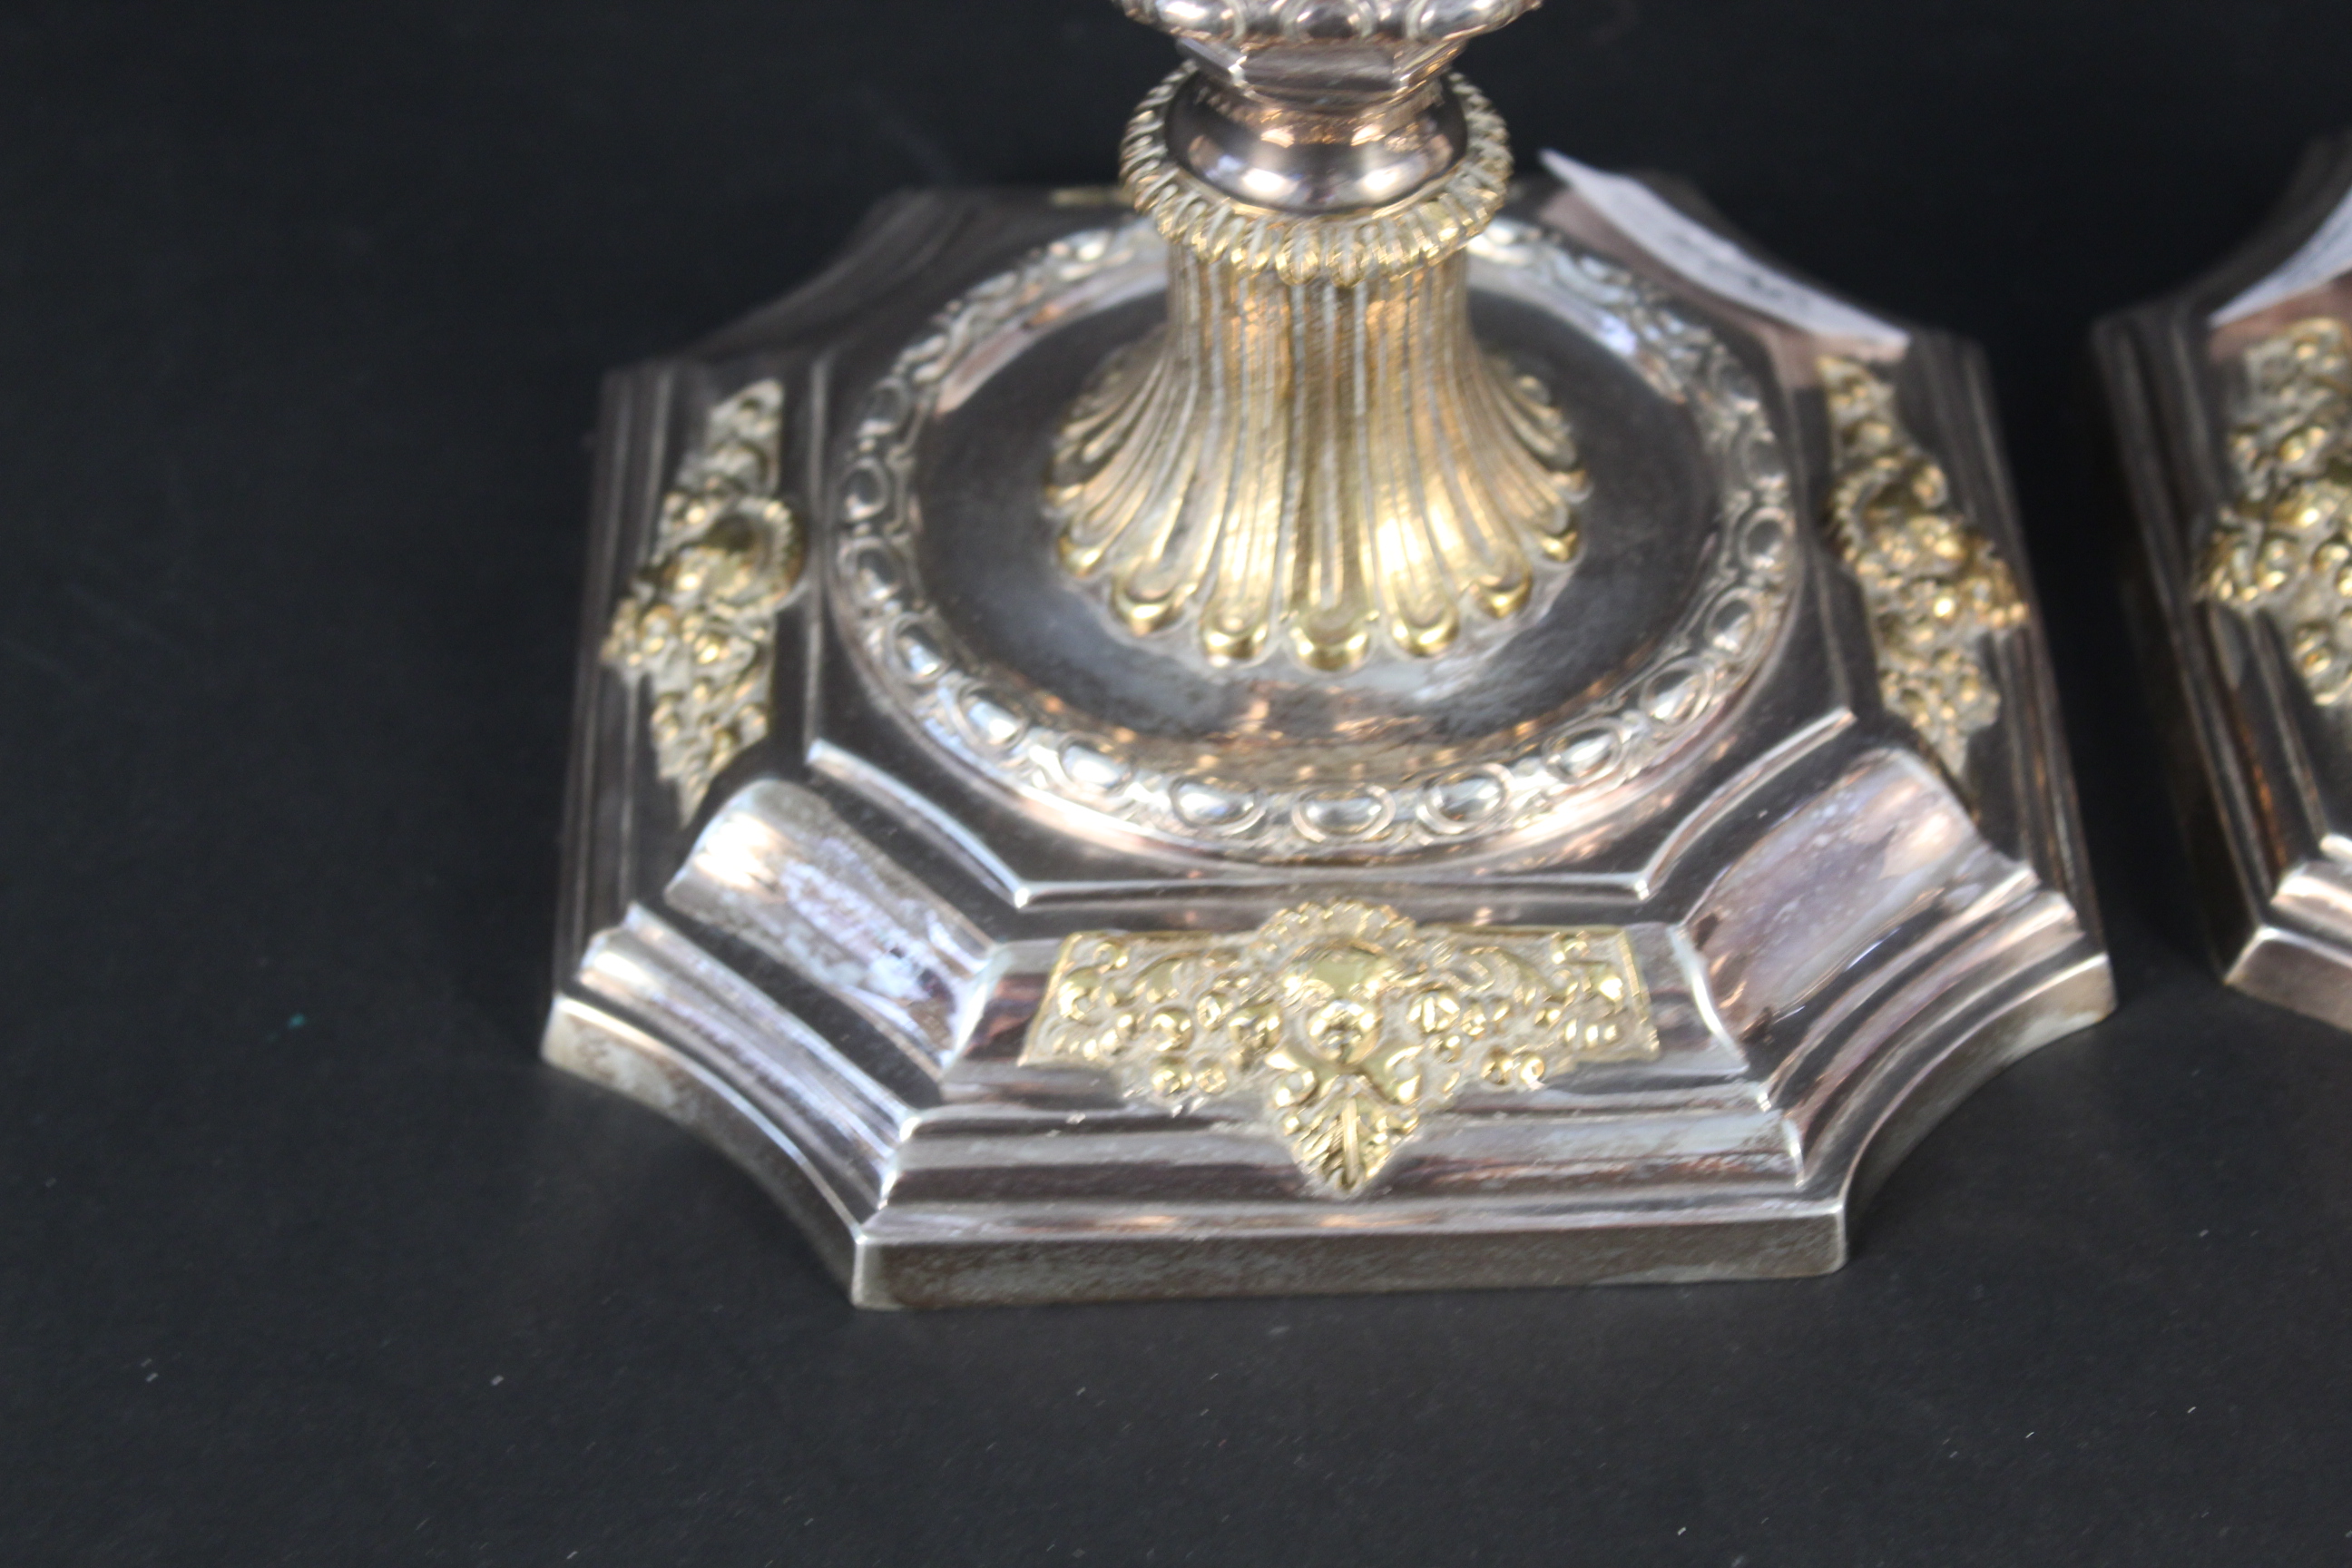 A pair of silver candlesticks with gilt floral and cherub decoration, - Image 2 of 3